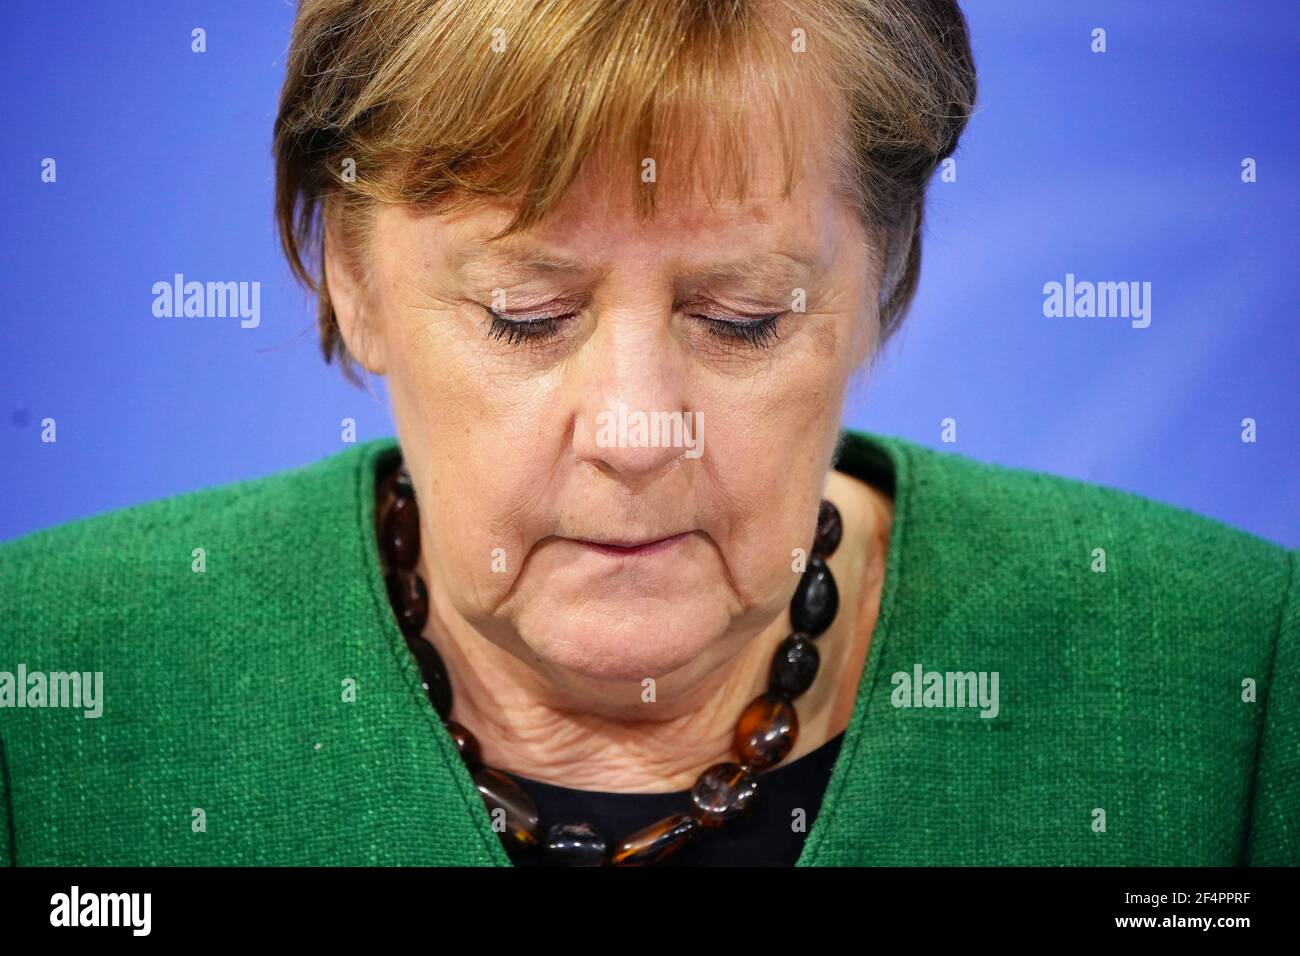 German Chancellor Angela Merkel looks down during a news conference after a meeting with state leaders to discuss options beyond the end of the pandemic lockdown, amid the outbreak of the coronavirus disease (COVID-19), in Berlin, Germany, March 23, 2021. Michael Kappeler/Pool via REUTERS Stock Photo